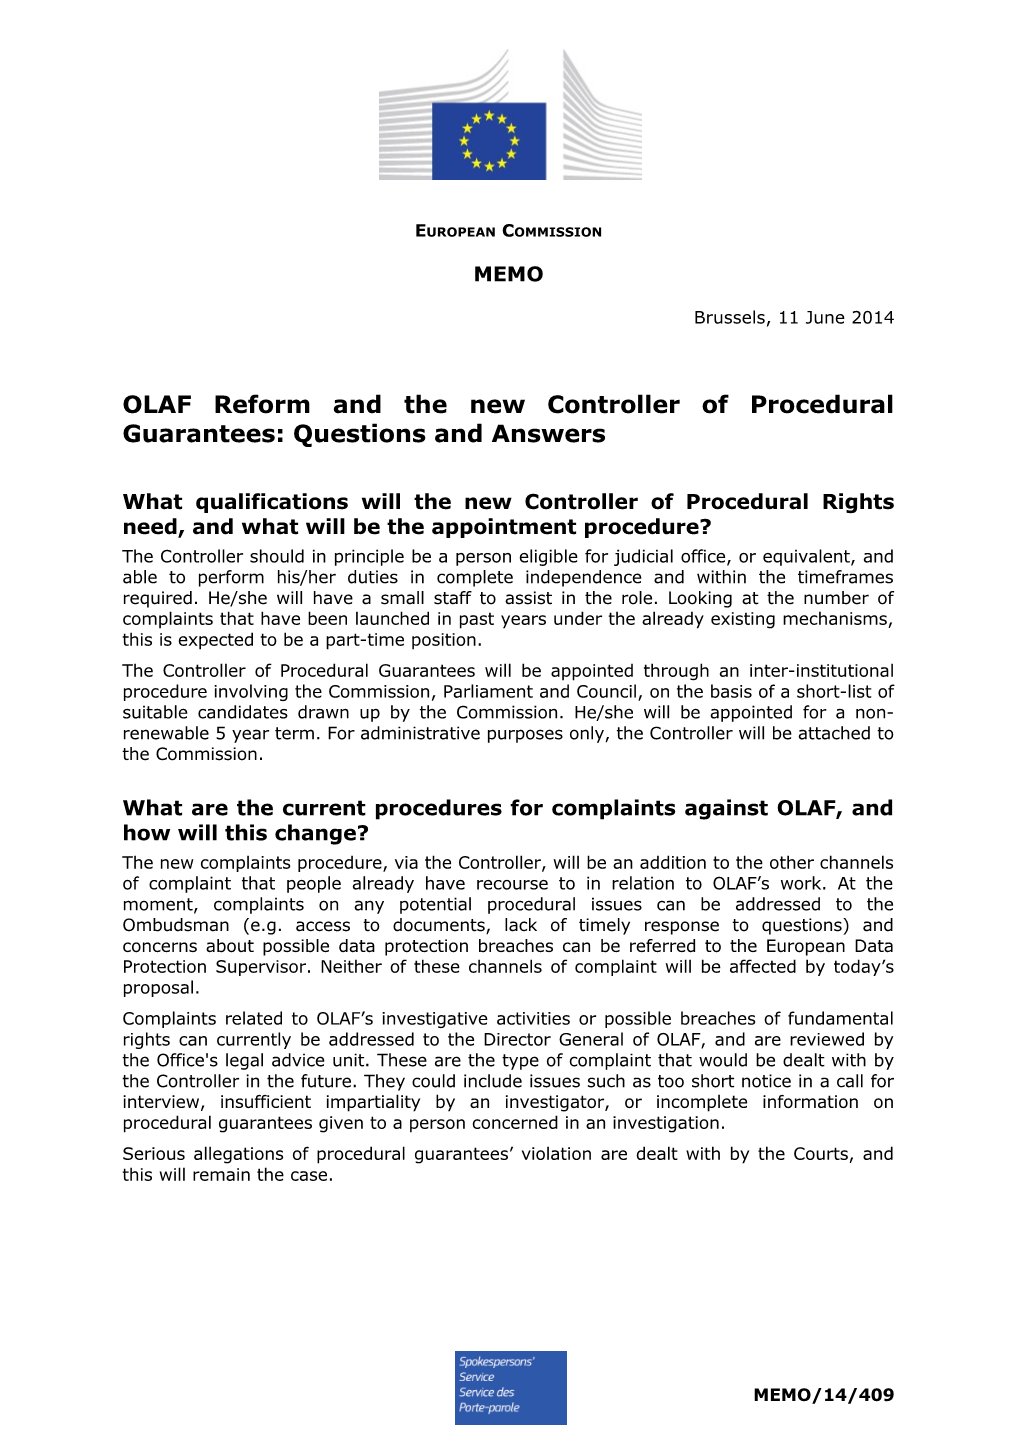 OLAF Reform and the New Controller of Procedural Guarantees: Questions and Answers